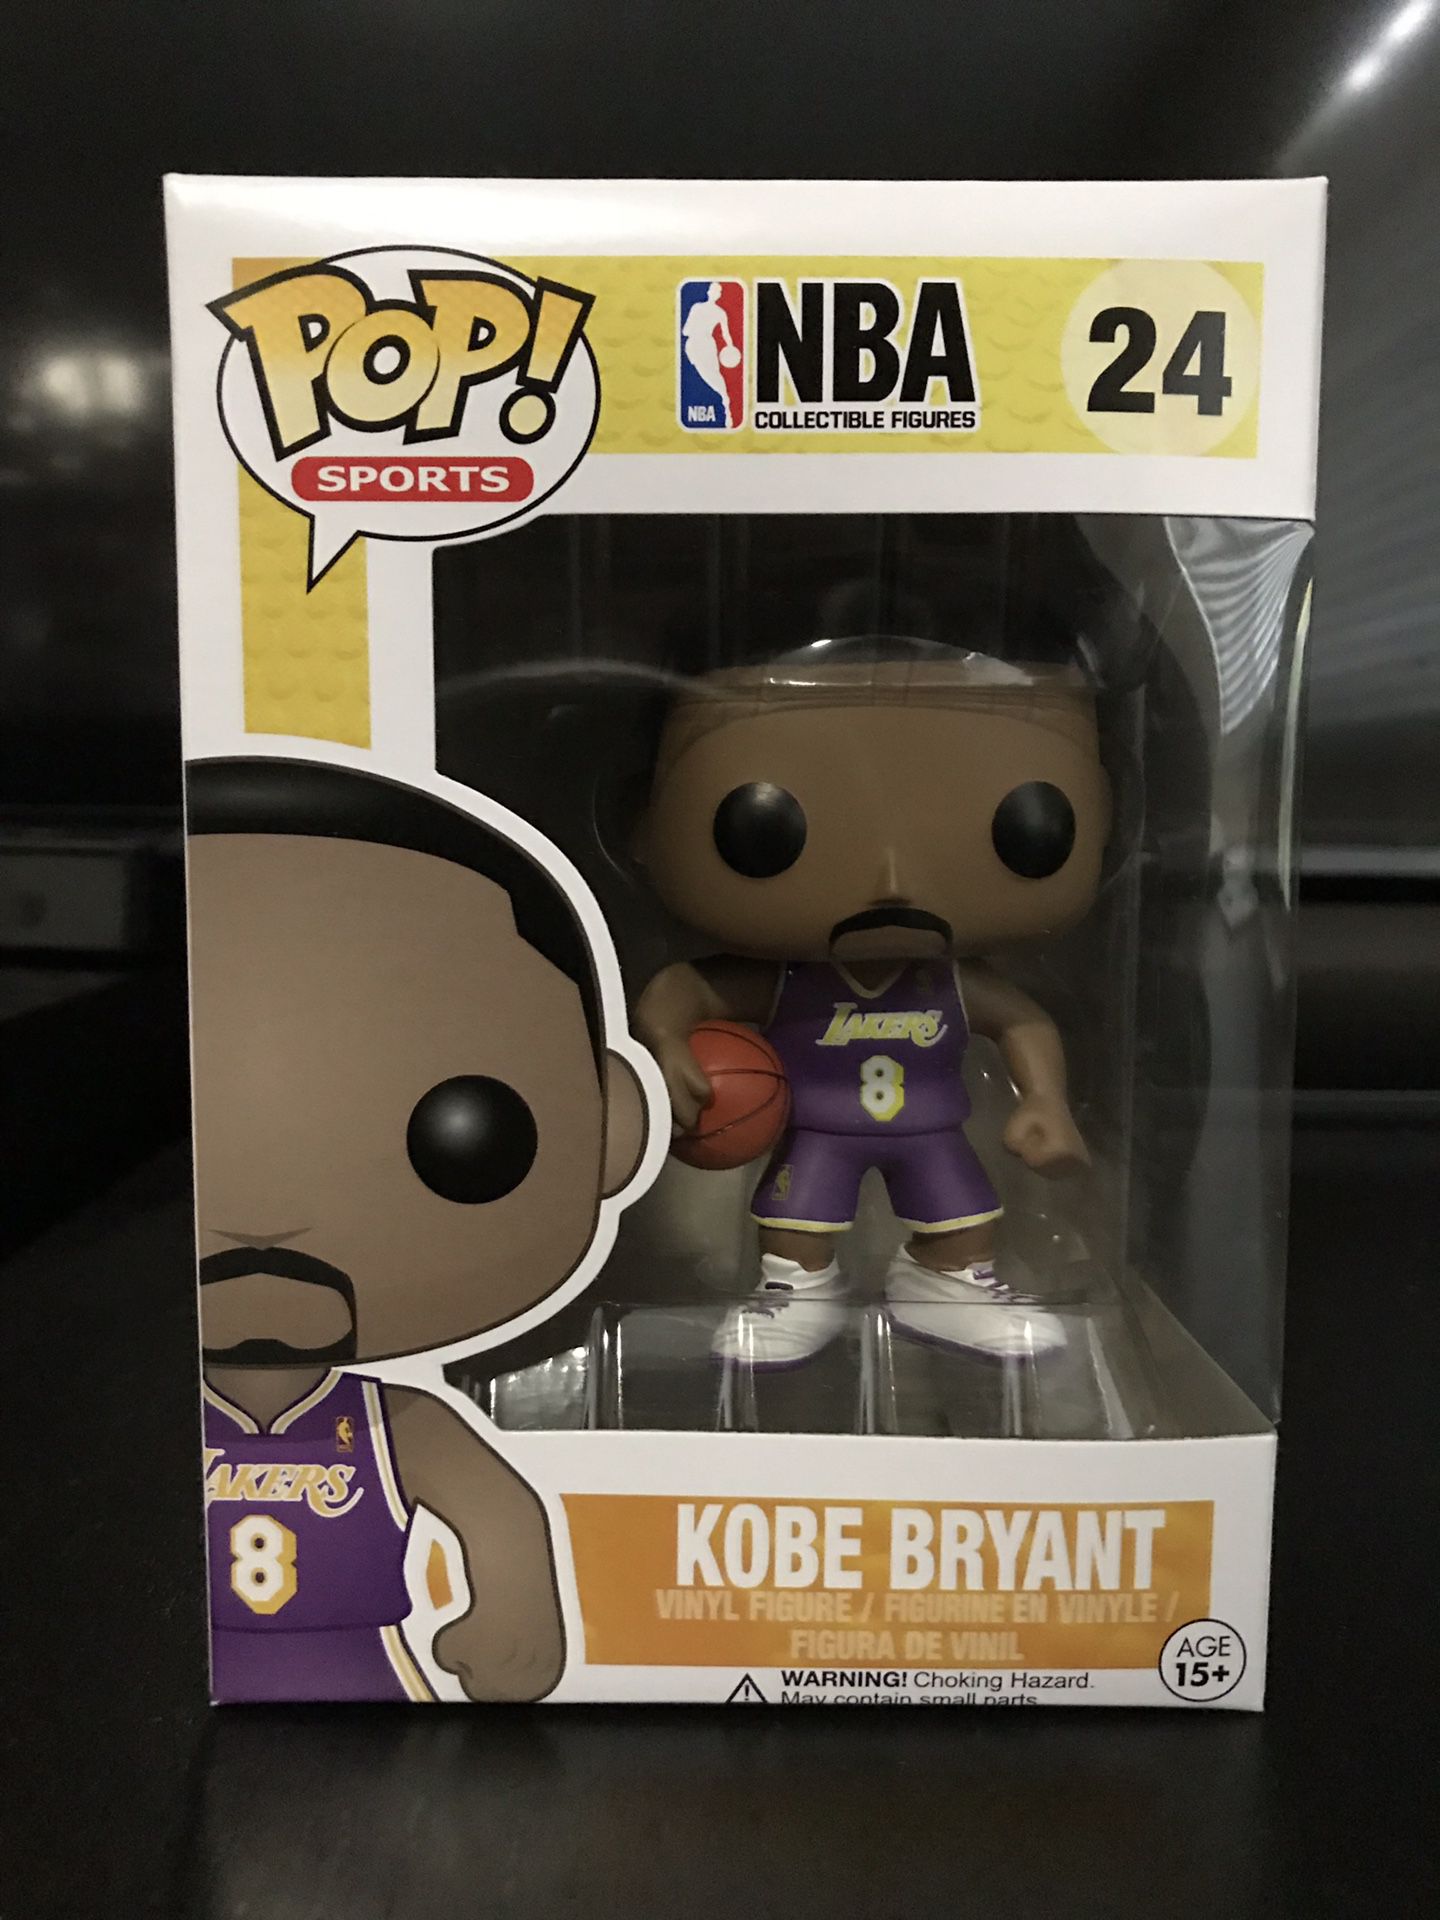 Number 8 2020 Hall Of Fame 1(contact info removed) Kobe Bryant Jersey for  Sale in Riverside, CA - OfferUp